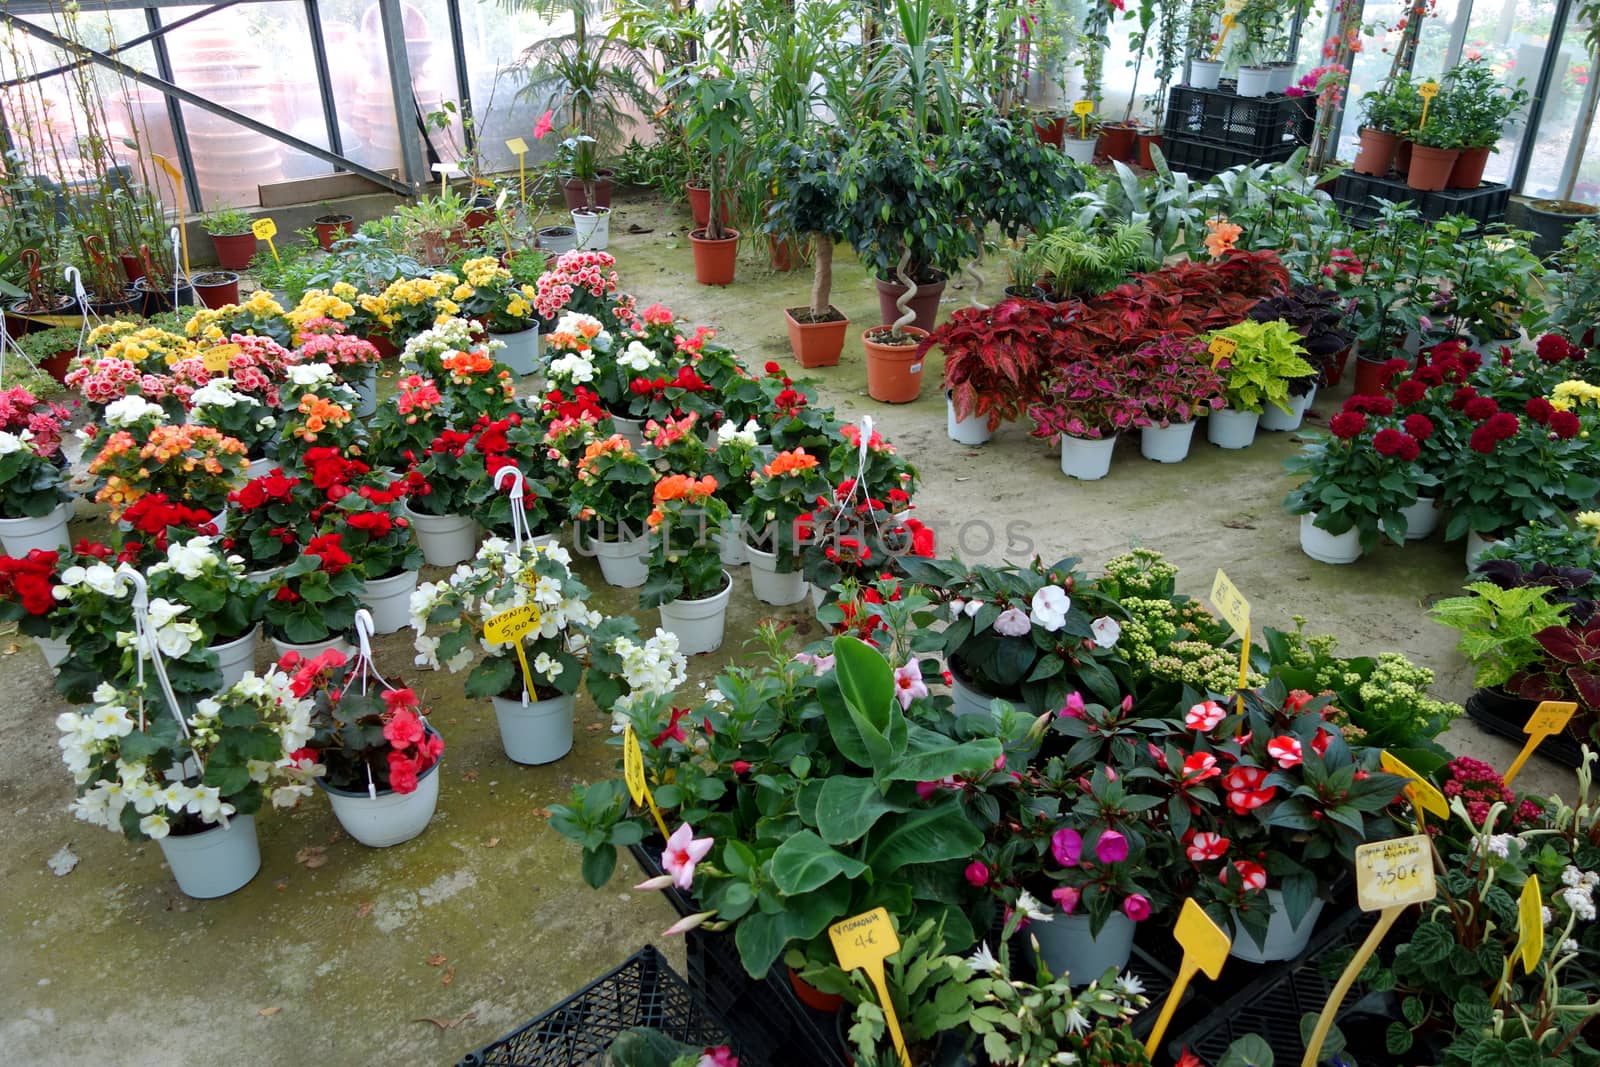 Plants and flowers for sale at the plant nursery.